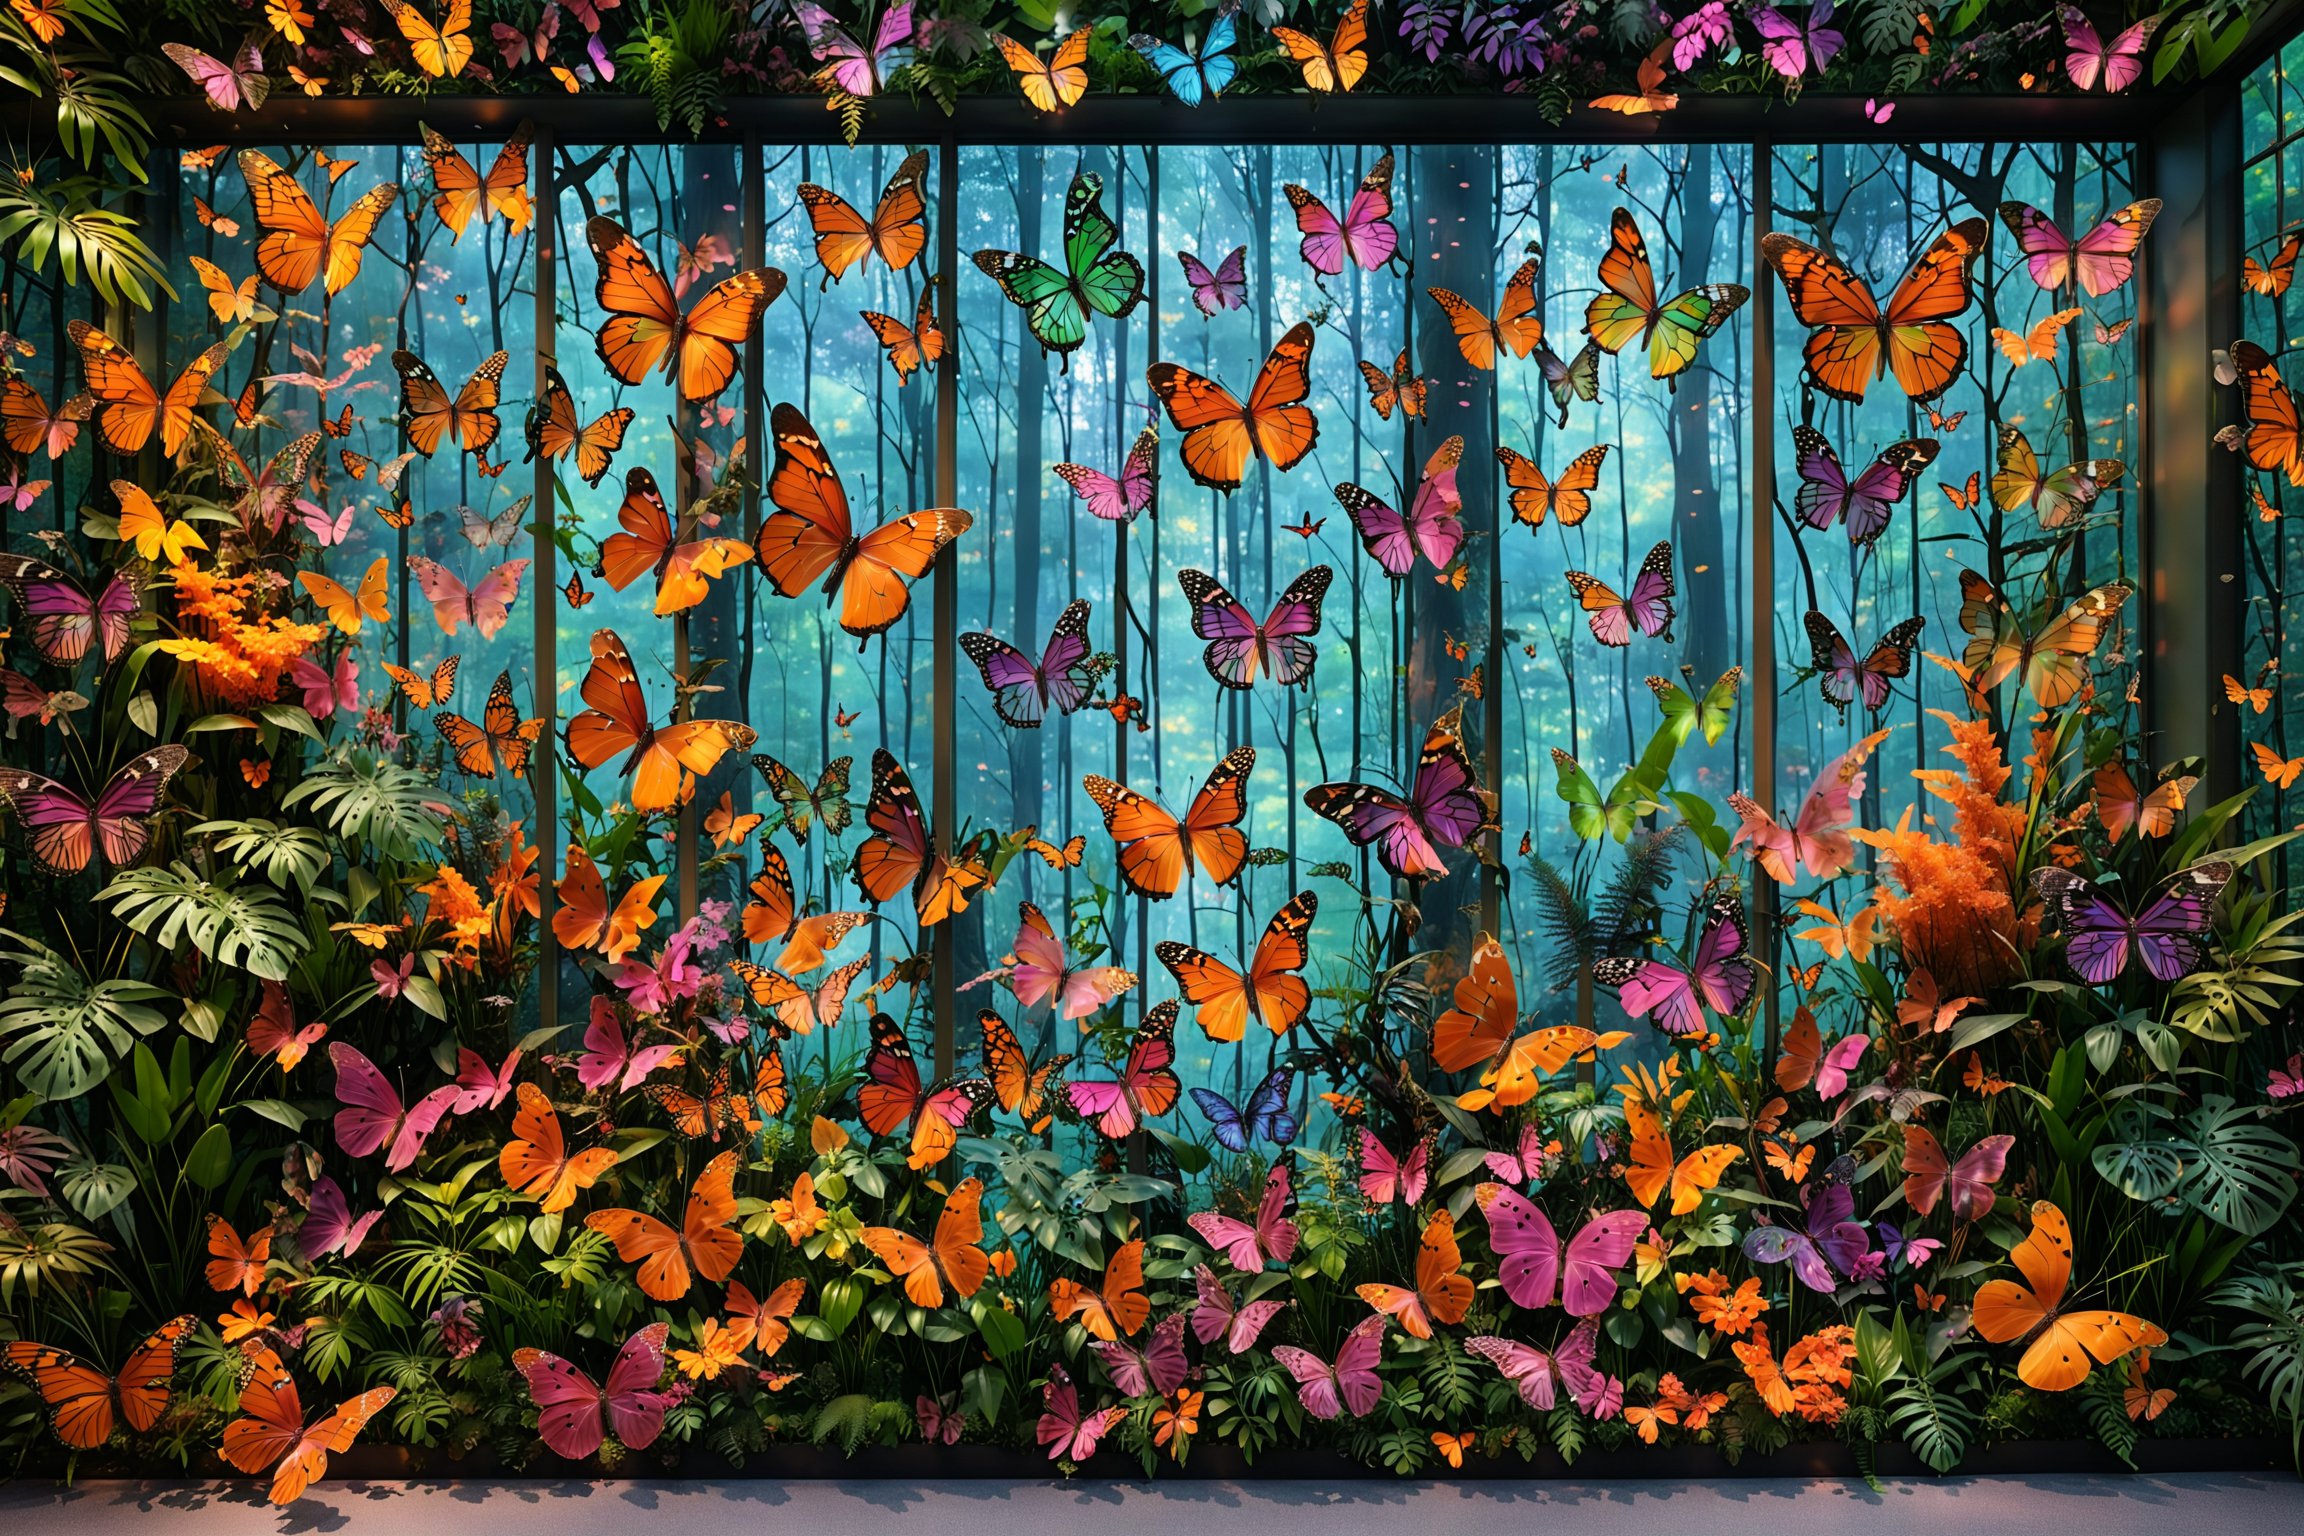 A large window or display, through which a misty forest can be seen. The window is adorned with multiple vibrant butterflies of various sizes and colors, predominantly orange with black patterns. Below the window, there's a lush arrangement of plants, flowers, and ferns in shades of green, orange, and pink. The overall ambiance of the image is serene, with the butterflies and plants creating a sense of a magical or enchanted forest.